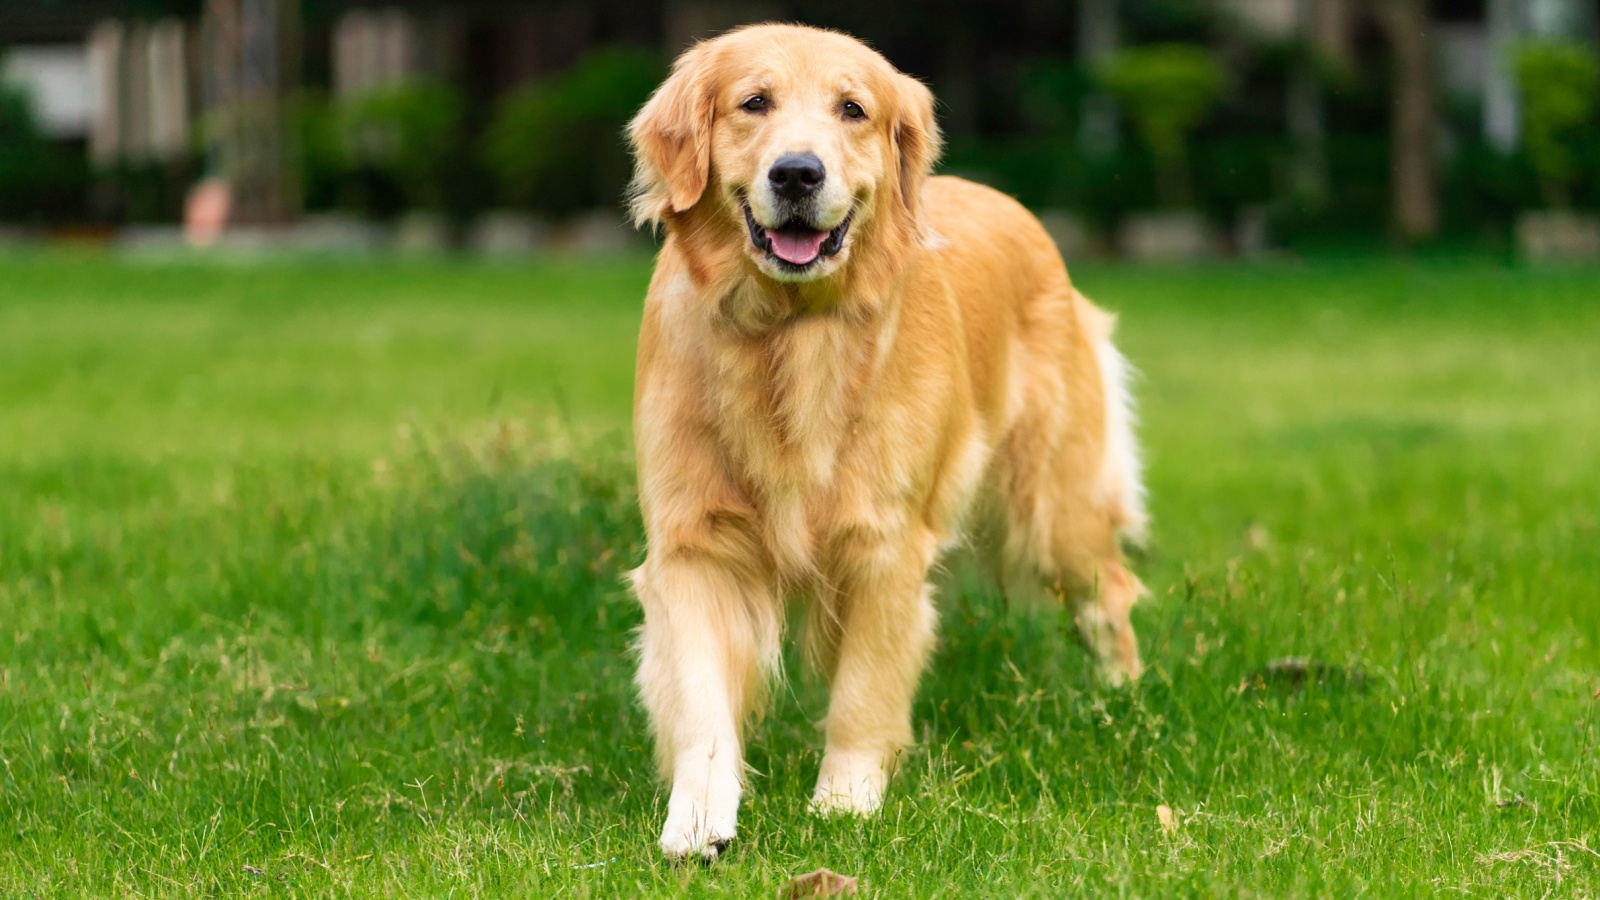 image credit: Burin P/Shutterstock <p>Golden retrievers are the epitome of a loving, gentle, and affectionate canine companion. Their warm, expressive eyes seem to reach into your soul, asking for just one more pat or cuddle. They’re always ready to offer comfort or celebrate joys with their human friends.</p>